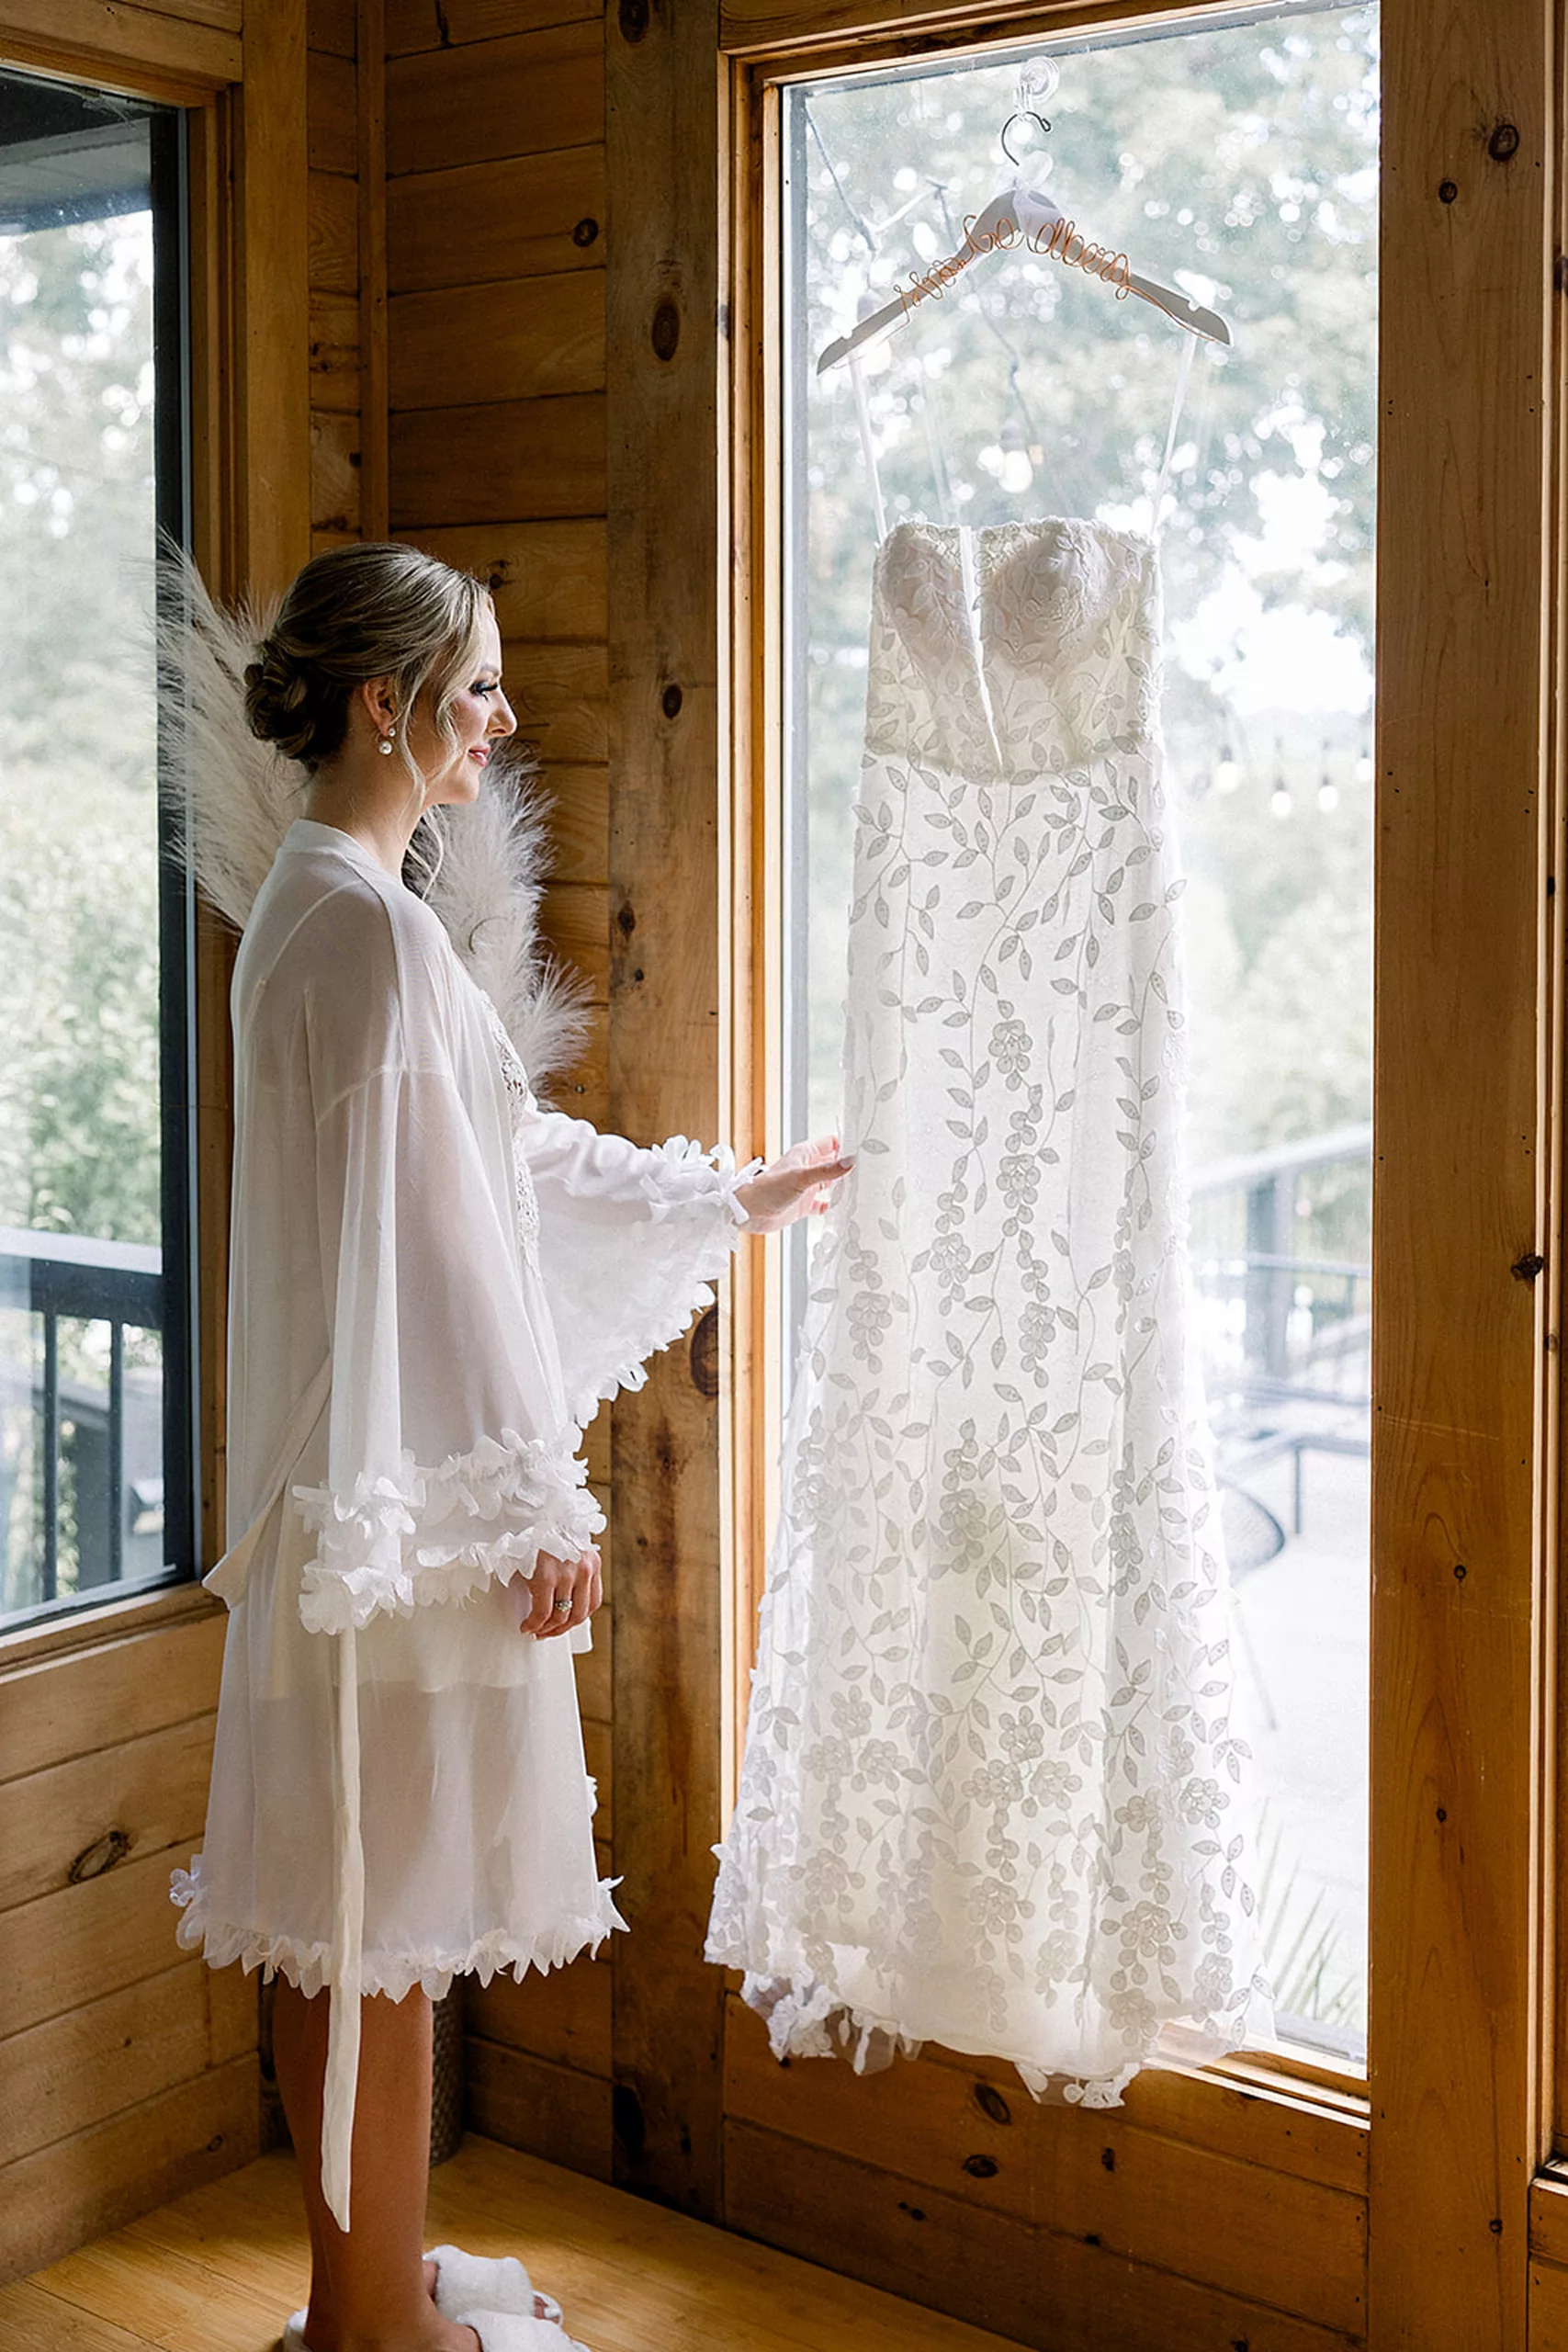 A bride in white pajamas looks at her dress as it hangs in a window from a custom hanger